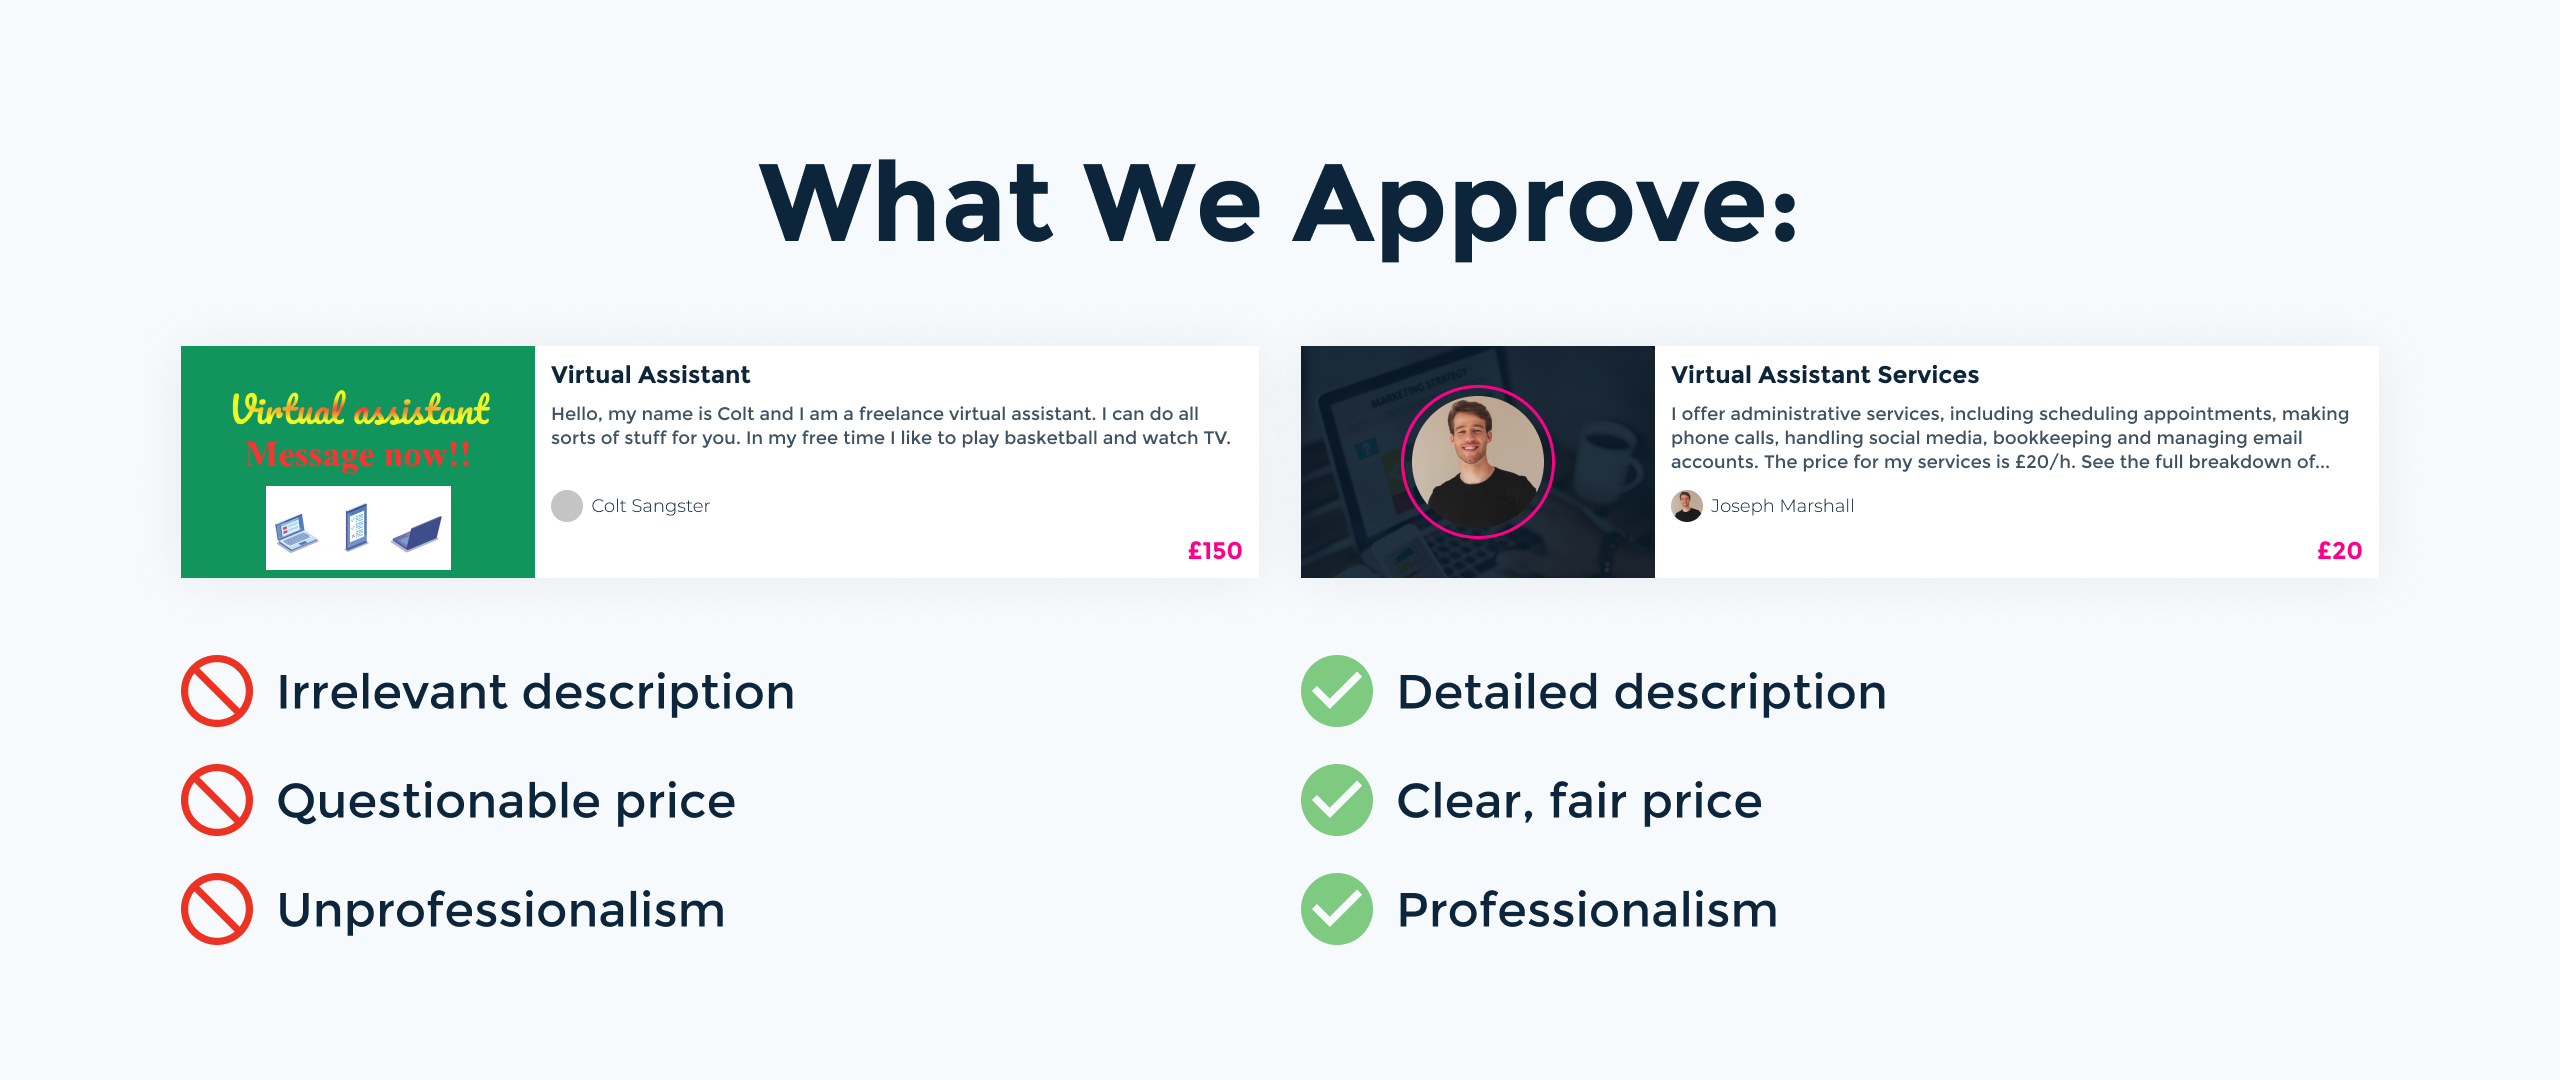 Profile approval, creating professional listing